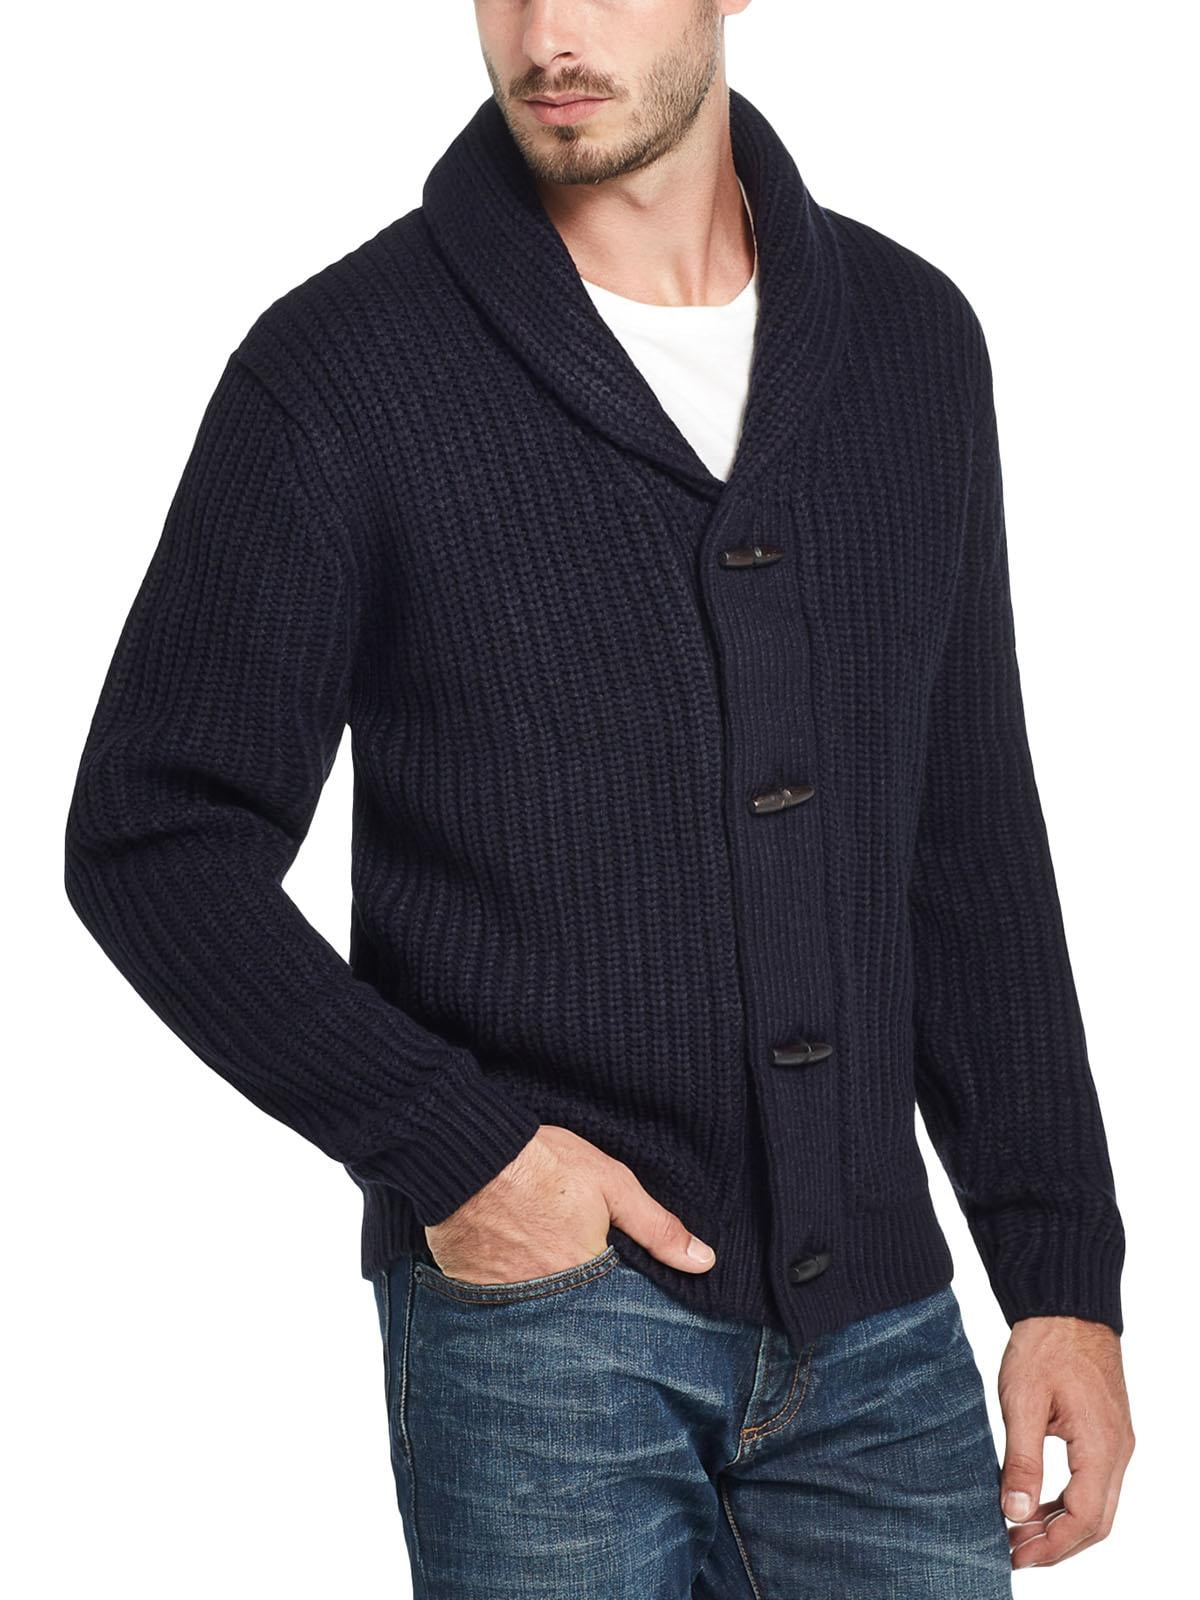 YONGM Mens Thick Knitted Shawl Collar Cardigan Sweaters 